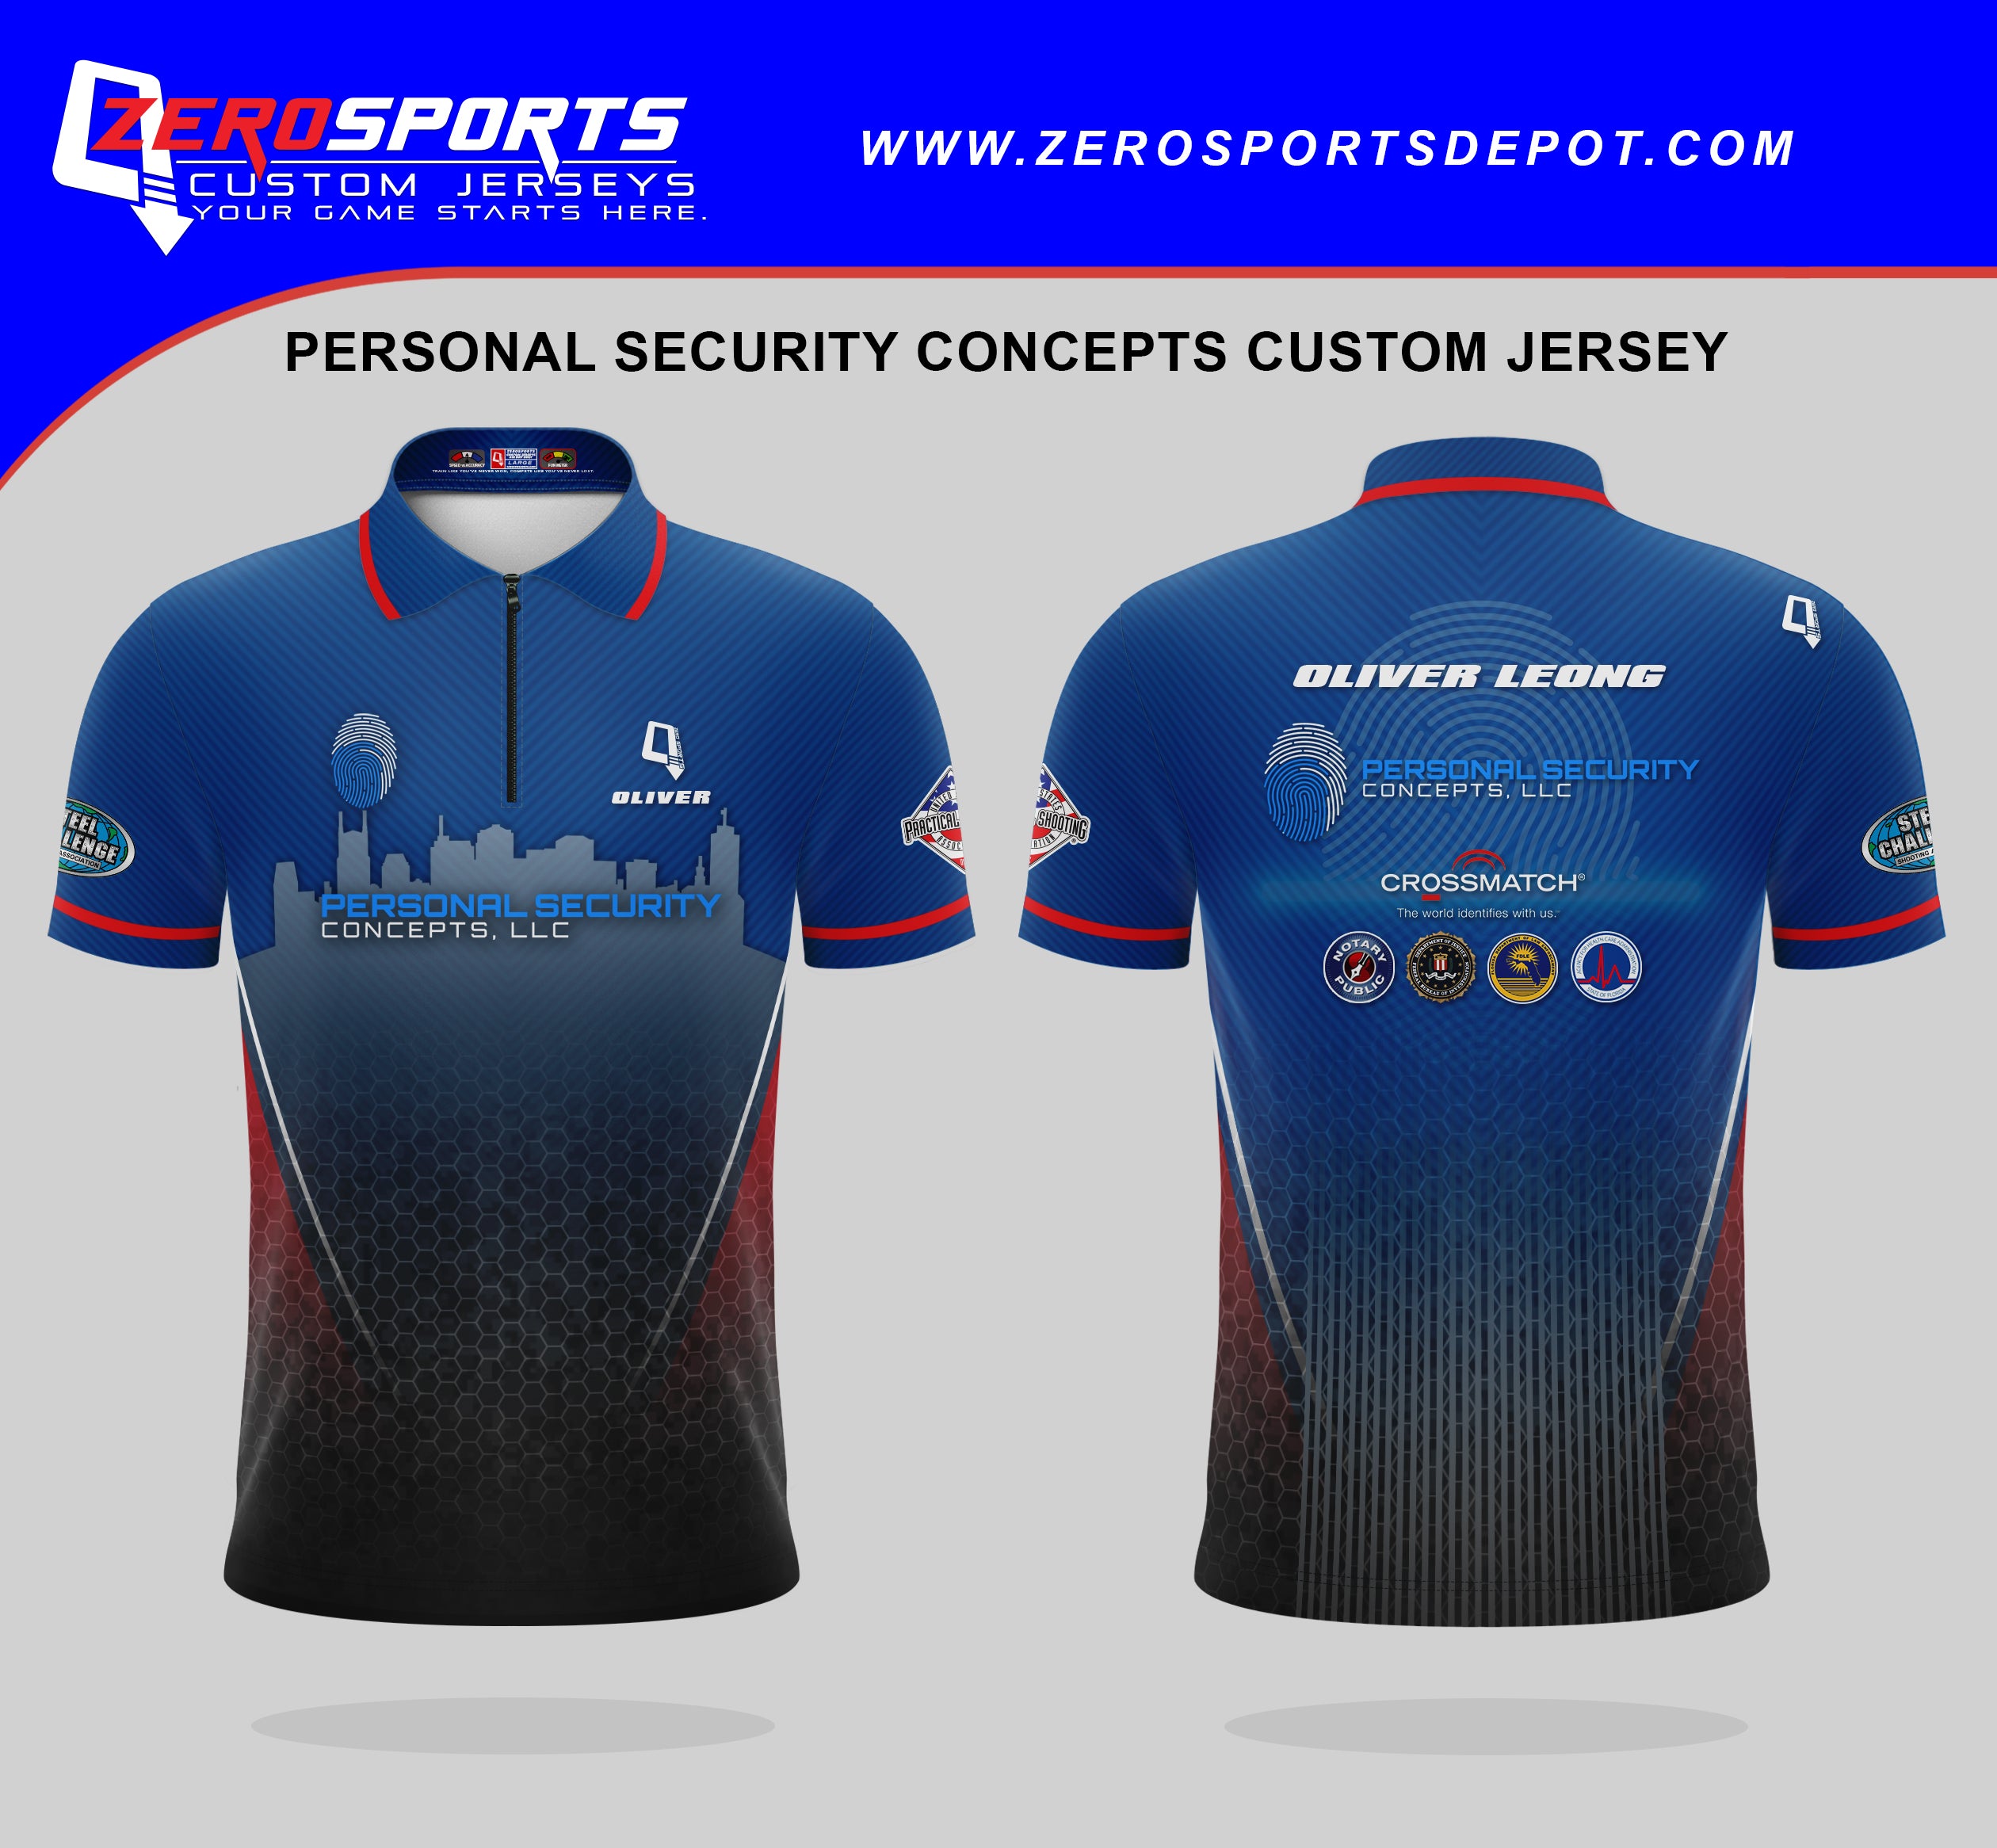 Personal Security Concepts Custom Jersey